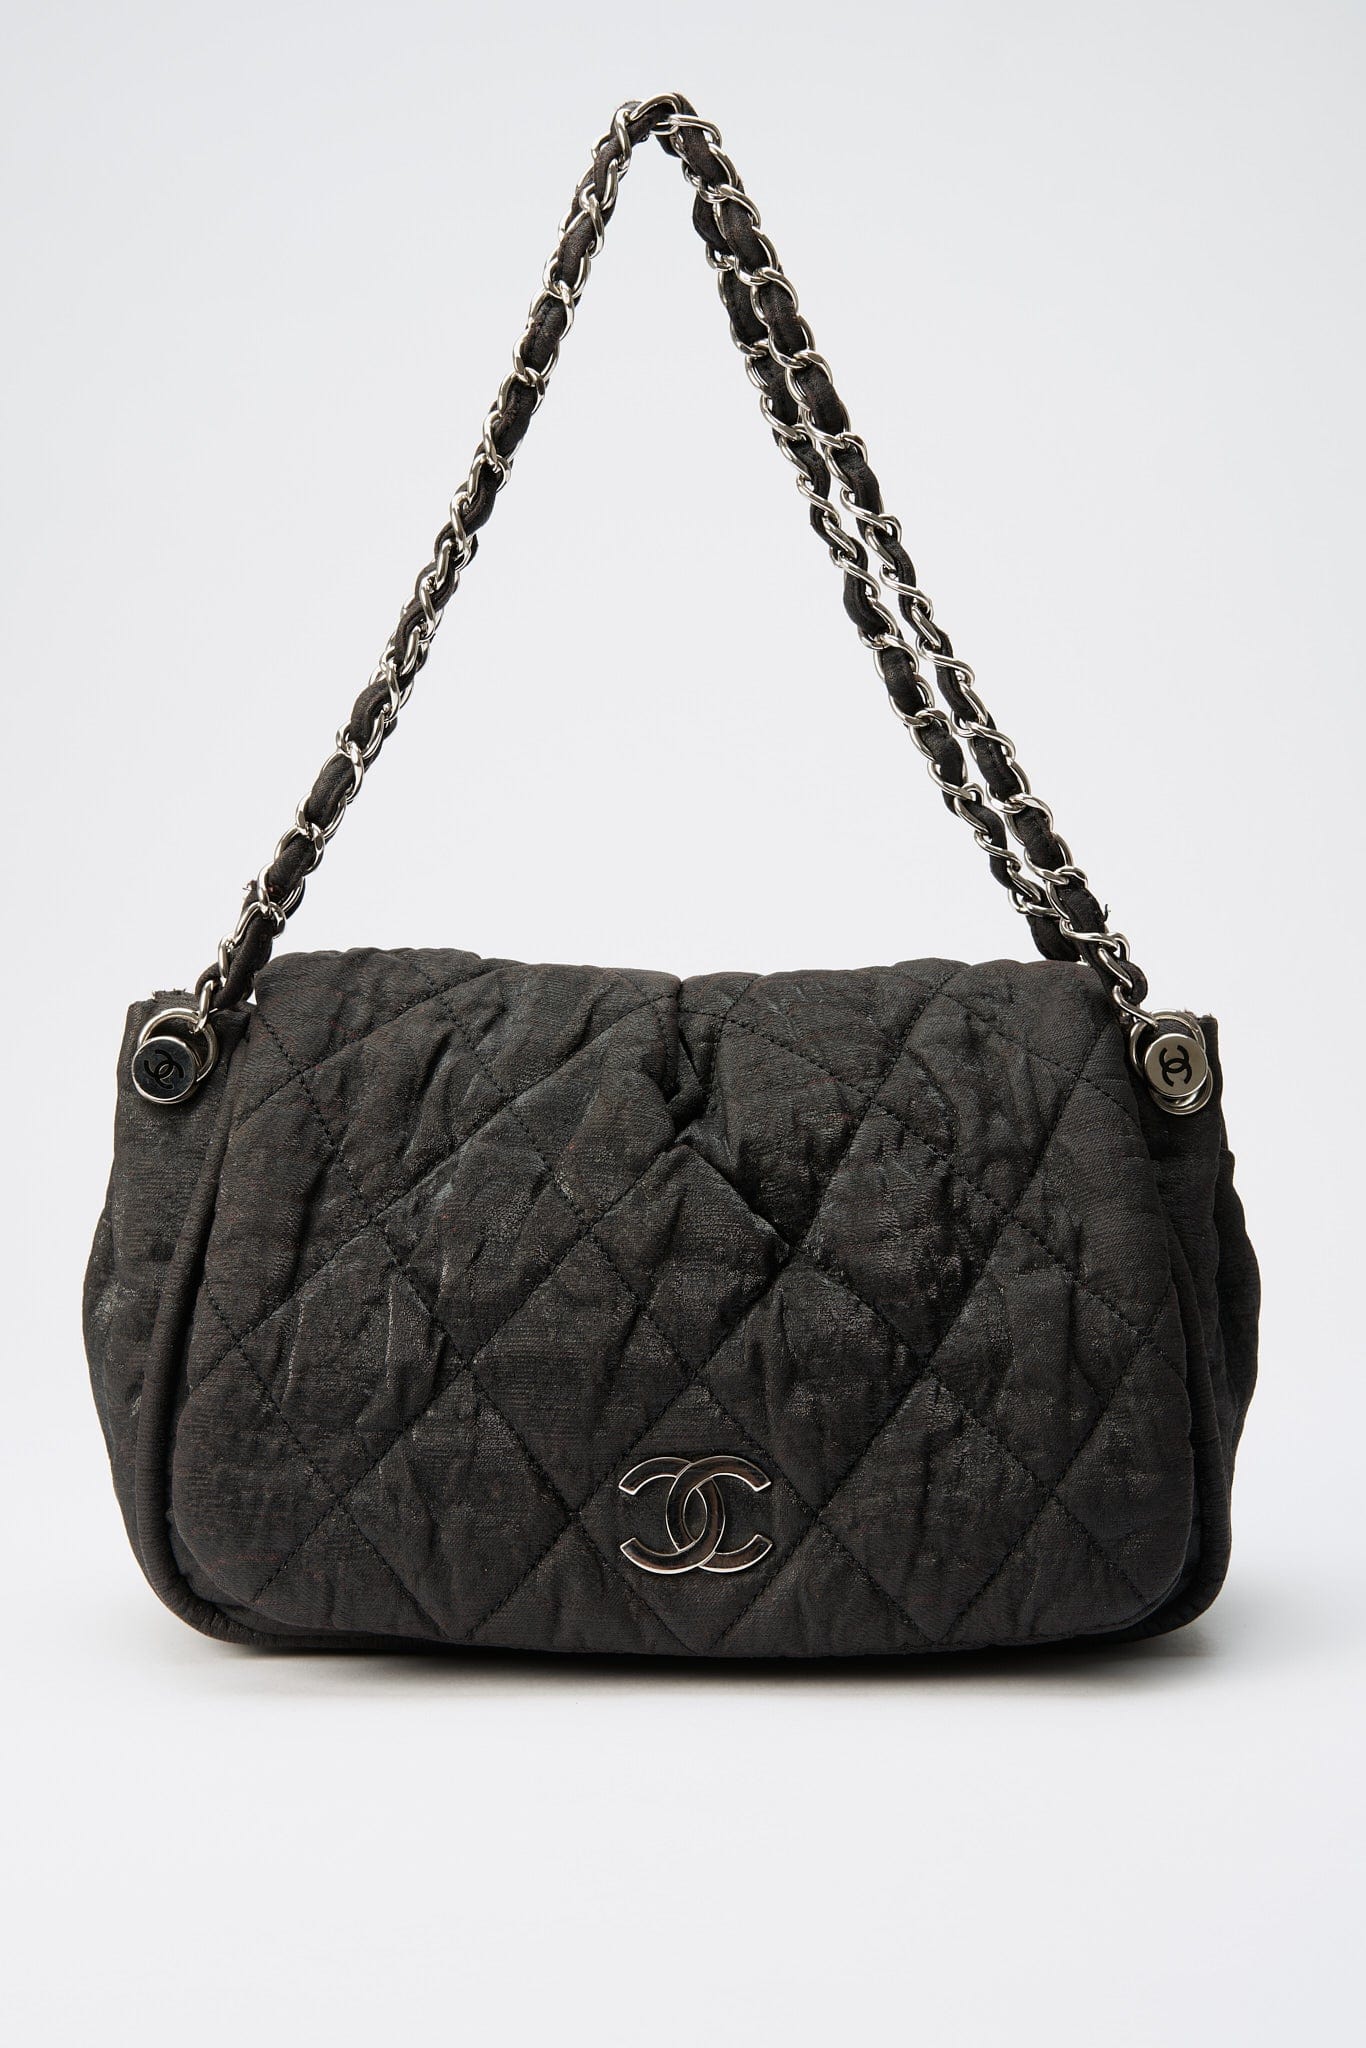 Chanel 2000s Extremely Rare Black CC Flap Bag · INTO